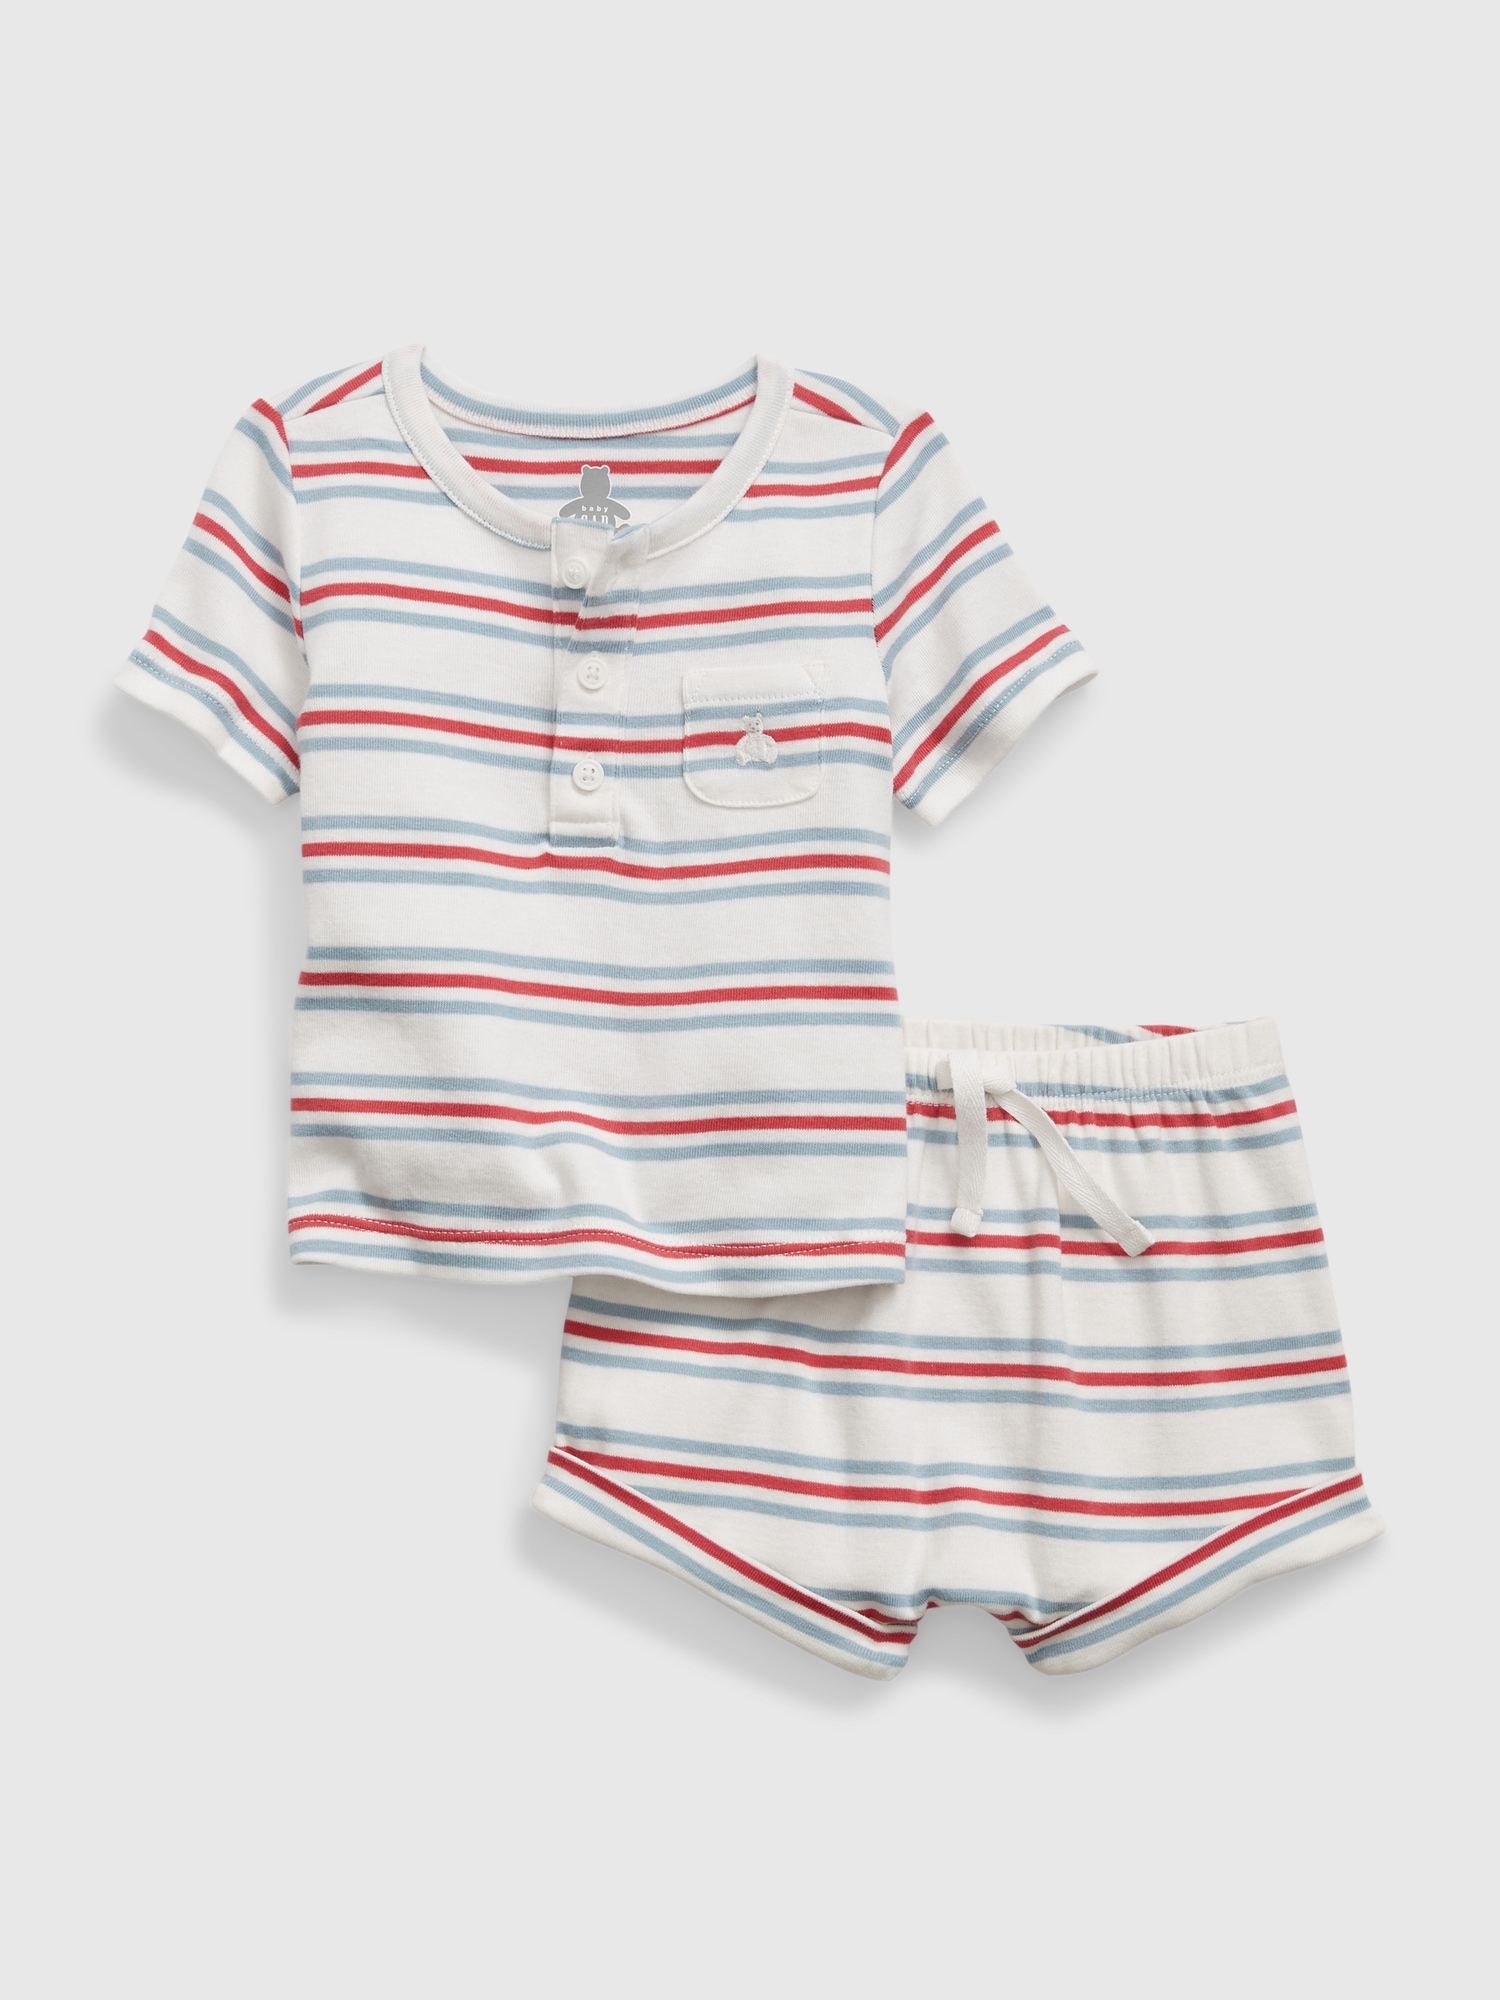 Gap Baby 100% Organic Cotton Henley Two-Piece Outfit Set white. 1